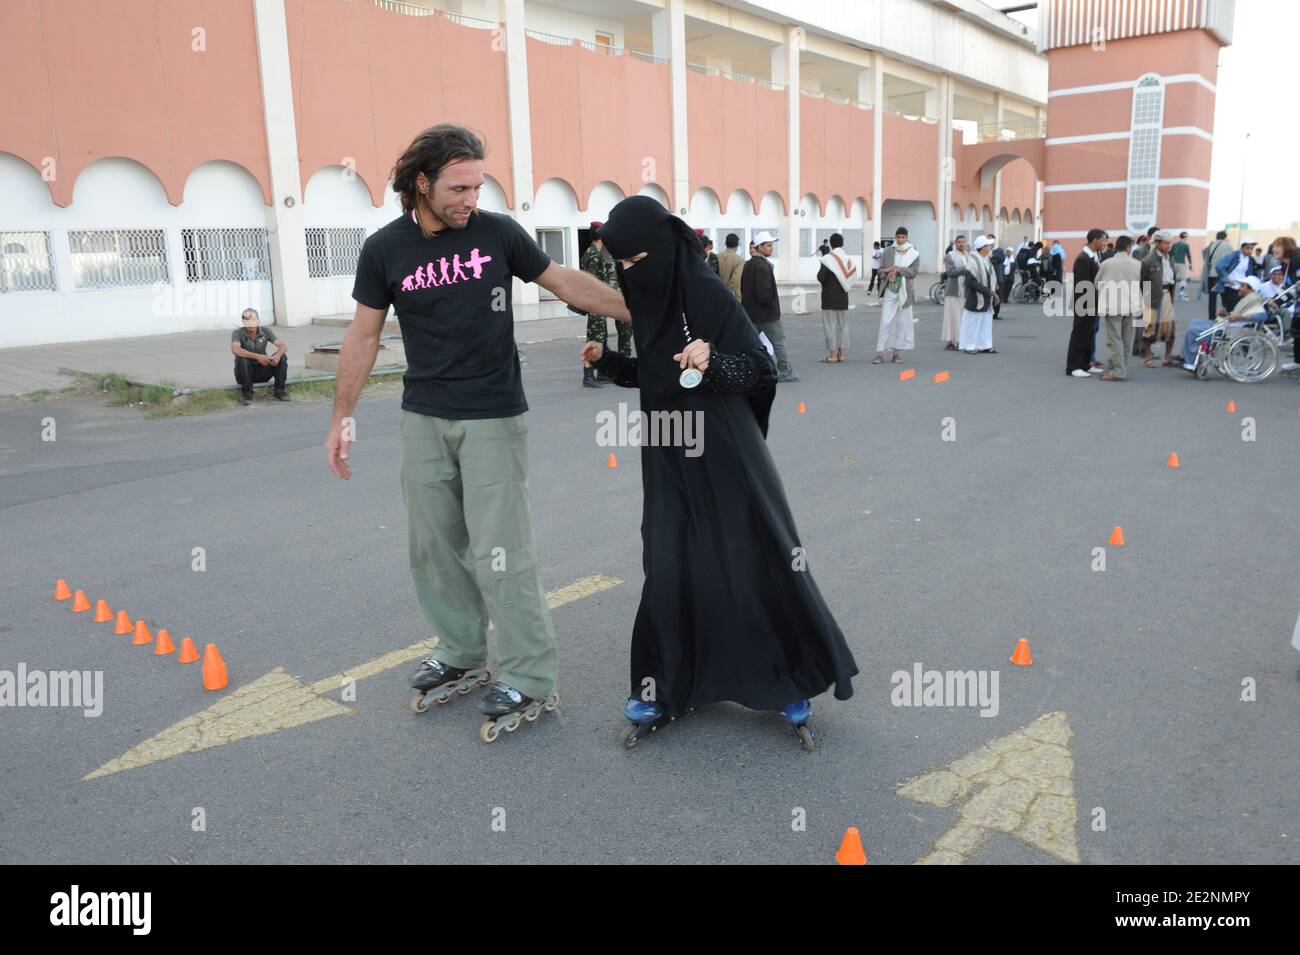 Roller trainer Fabrice teaches young Yemenite woman Altaf how to use the roller blades, as French rollerbladers are skating with Yemenite disabled people, in a rallye around the 'Al-Saleh' mosque in Sana'a, Yemen, on February 28, 2010. Yemen is seen as a 'dangerous' country, with terrorism threat for westerners. The event was meant to draw attention to Yemenite disabled special needs, and ask for laws to support them. Photo by Ammar Abd Rabbo/ABACAPRESS.COM Stock Photo